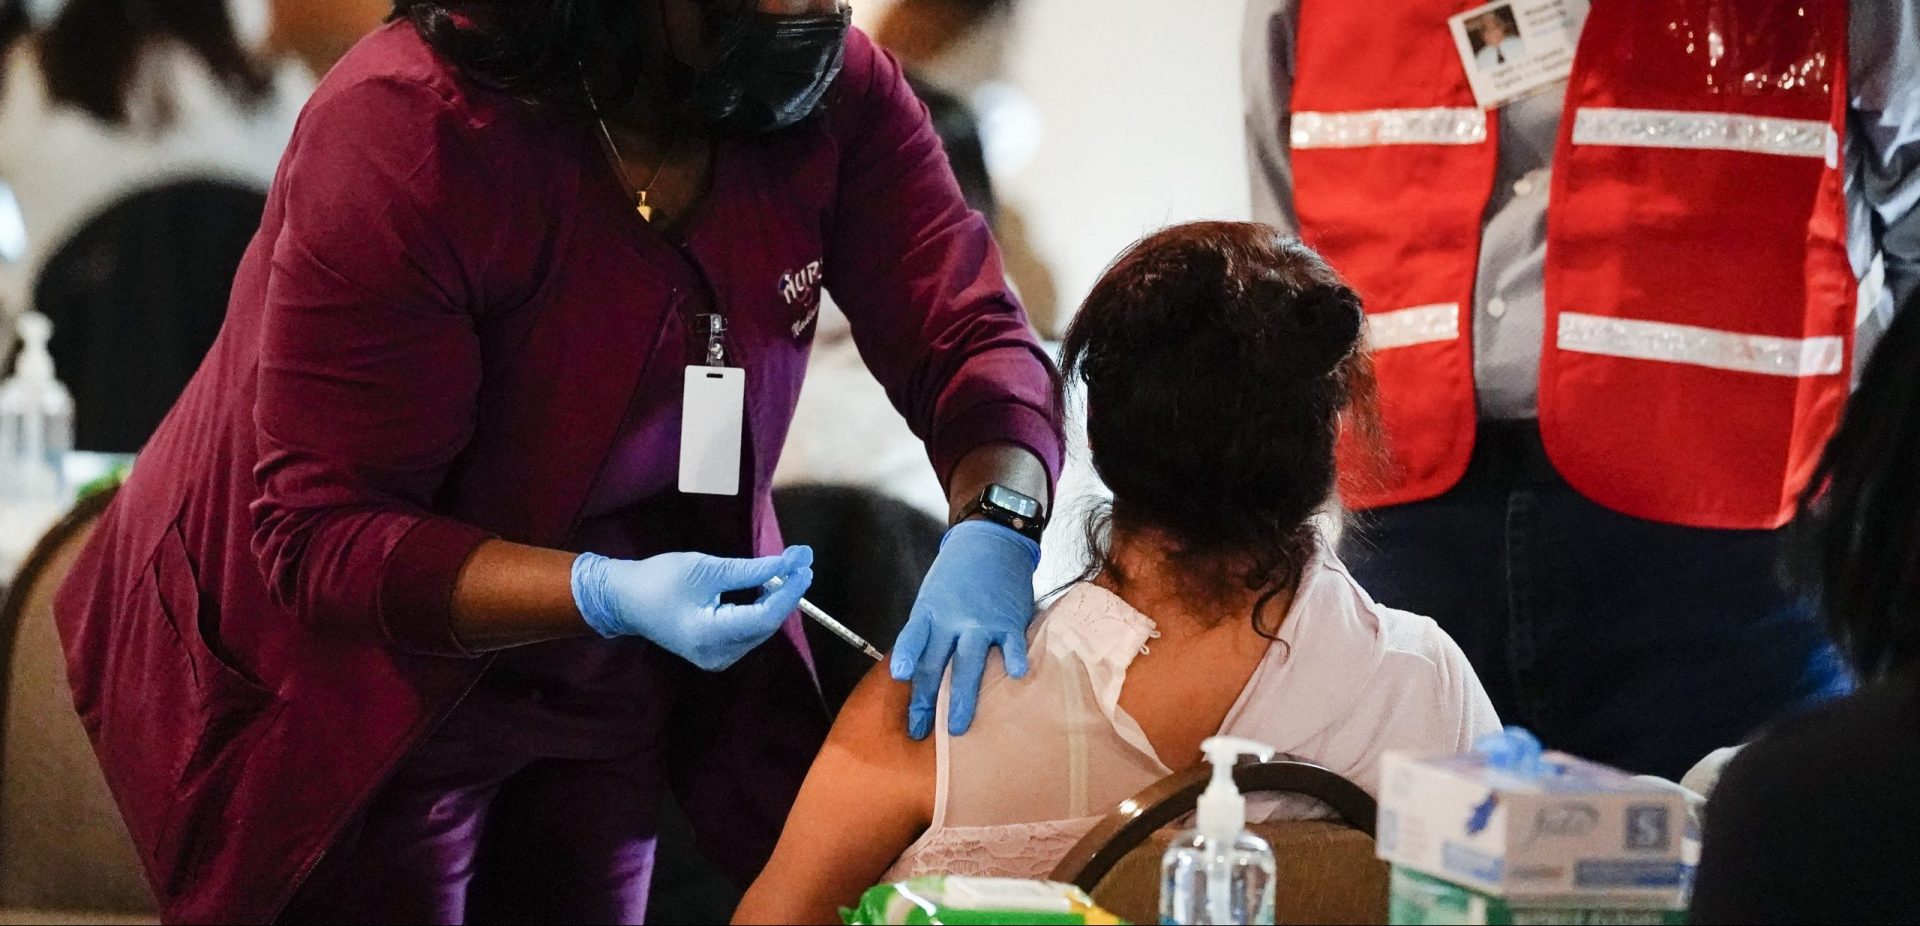 A health worker administers a dose of a Pfizer COVID-19 vaccine during a vaccination clinic at the Grand Yesha Ballroom in Philadelphia, Wednesday, March 17, 2021.